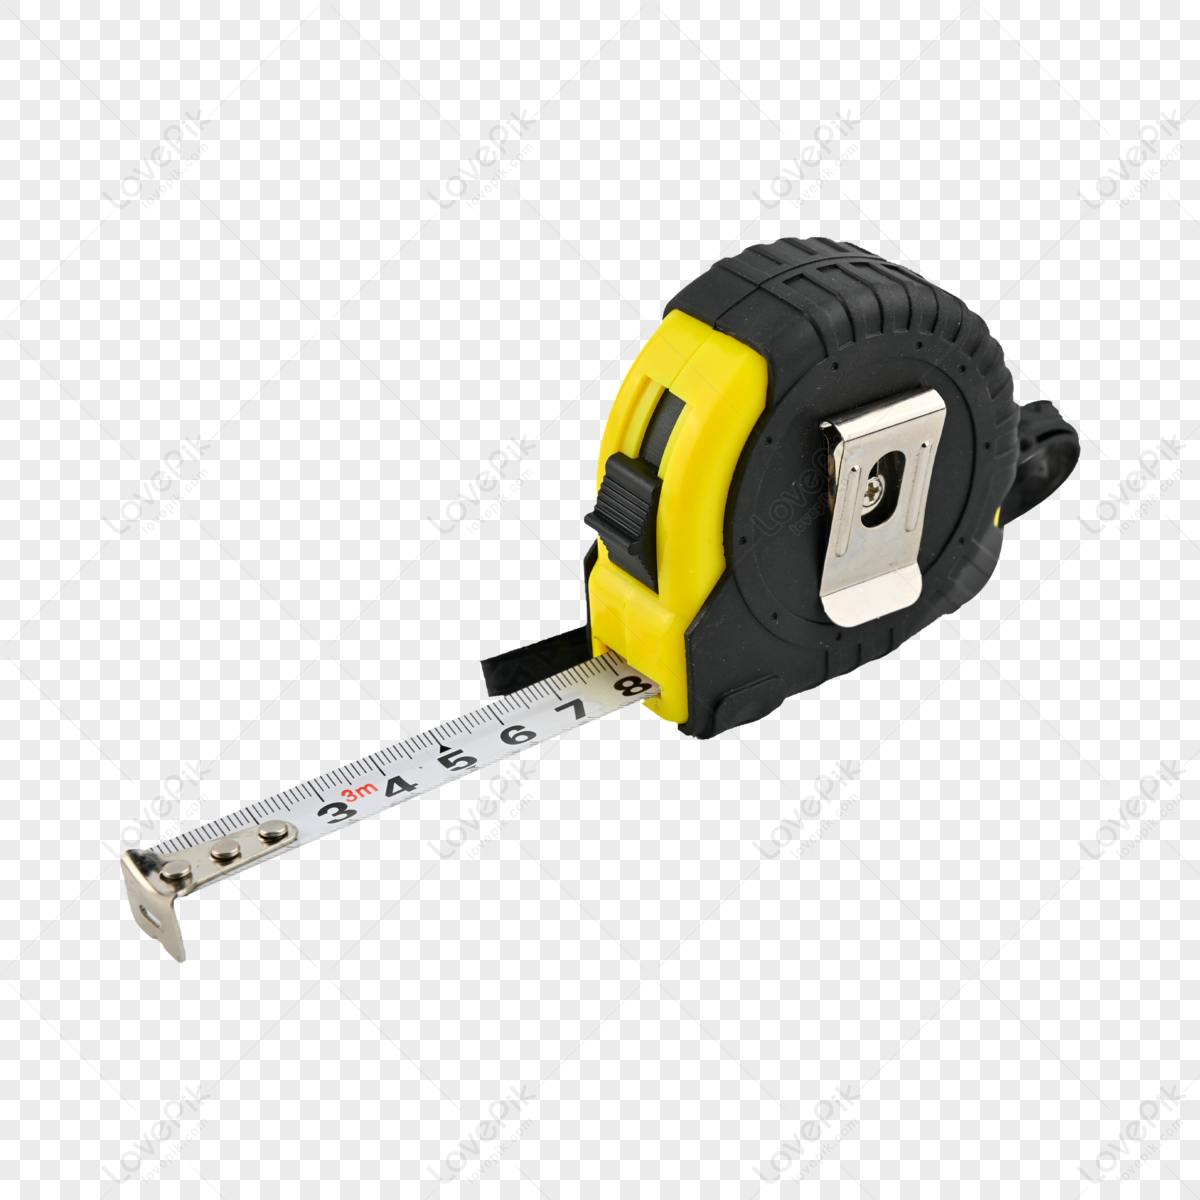 Steel Tape Measure PNG Images With Transparent Background